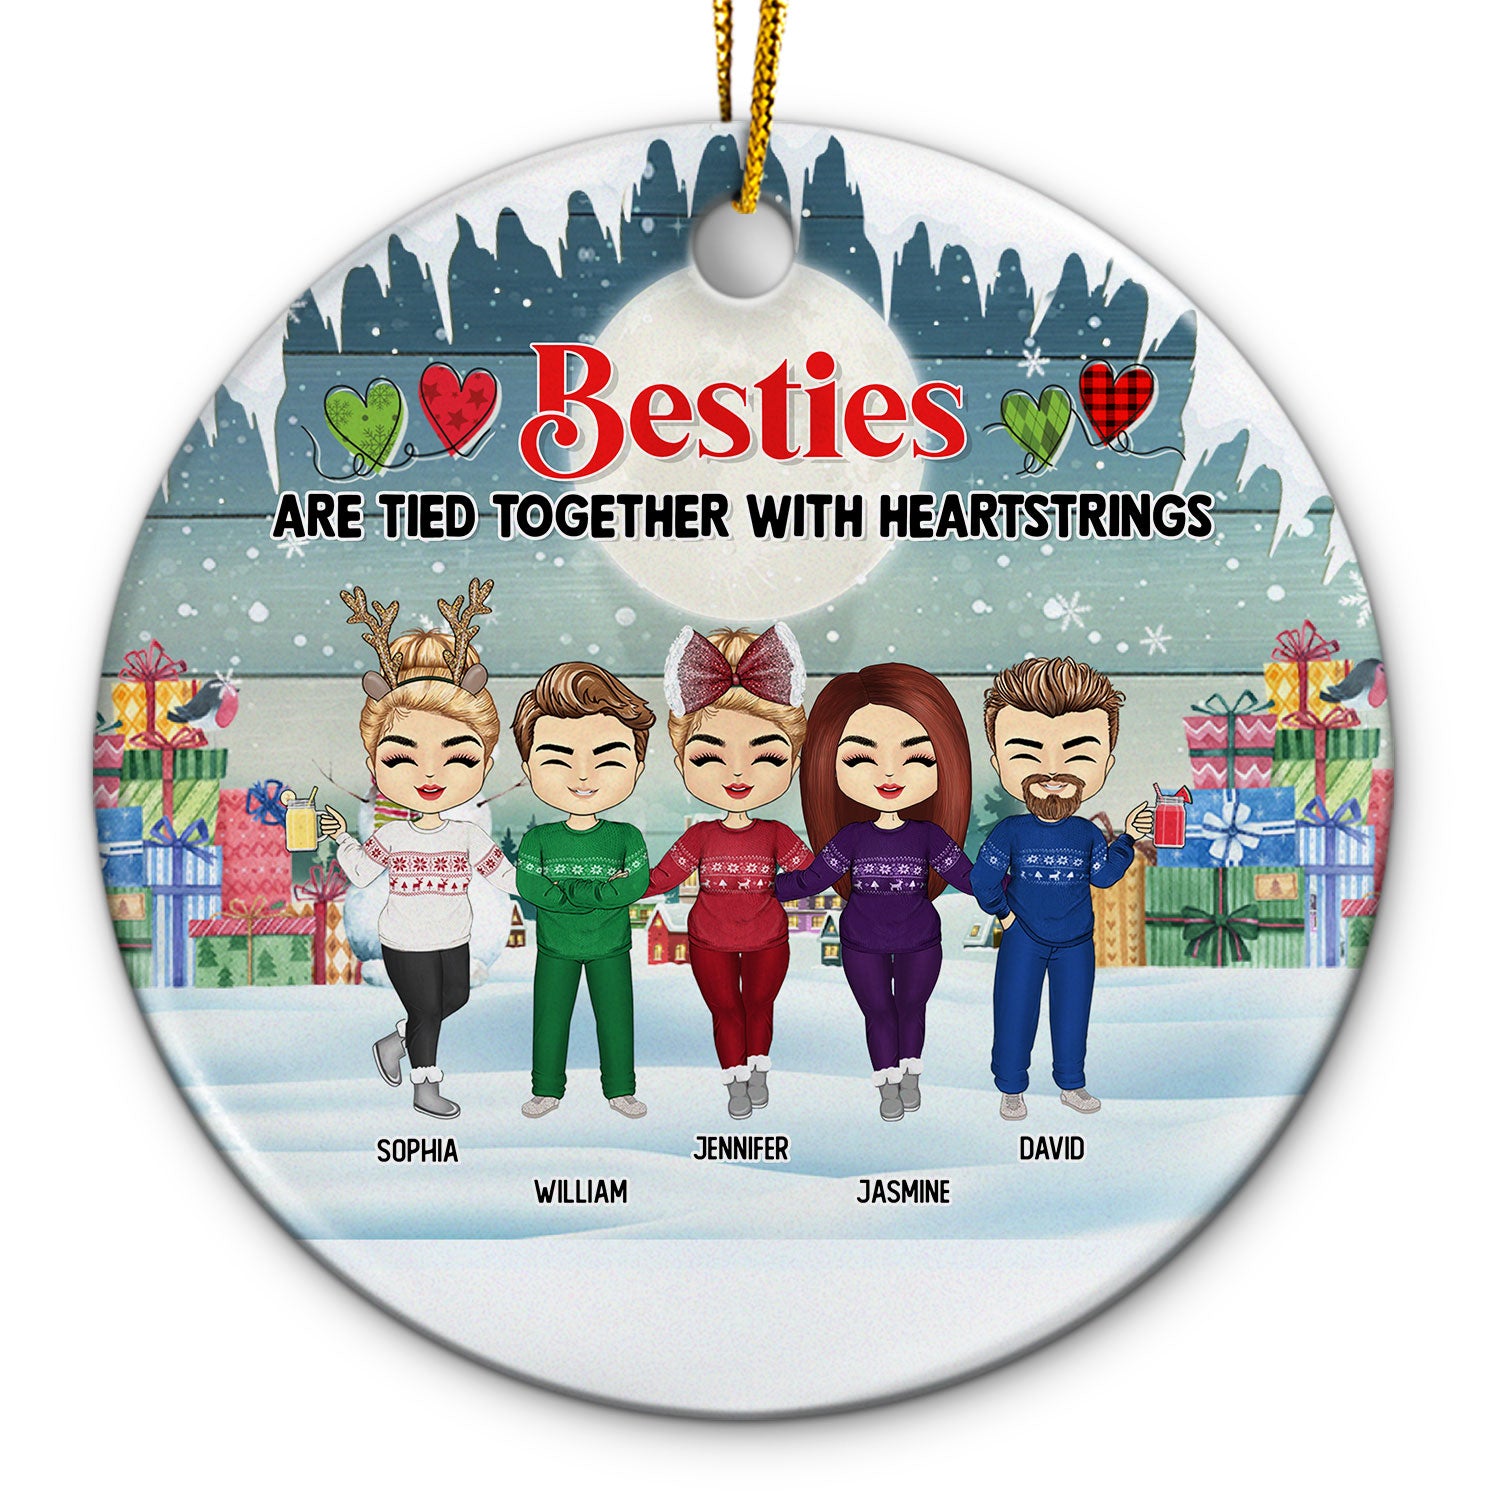 Tied Together With Heartstring - Christmas Gift For Besties - Personalized Custom Circle Ceramic Ornament